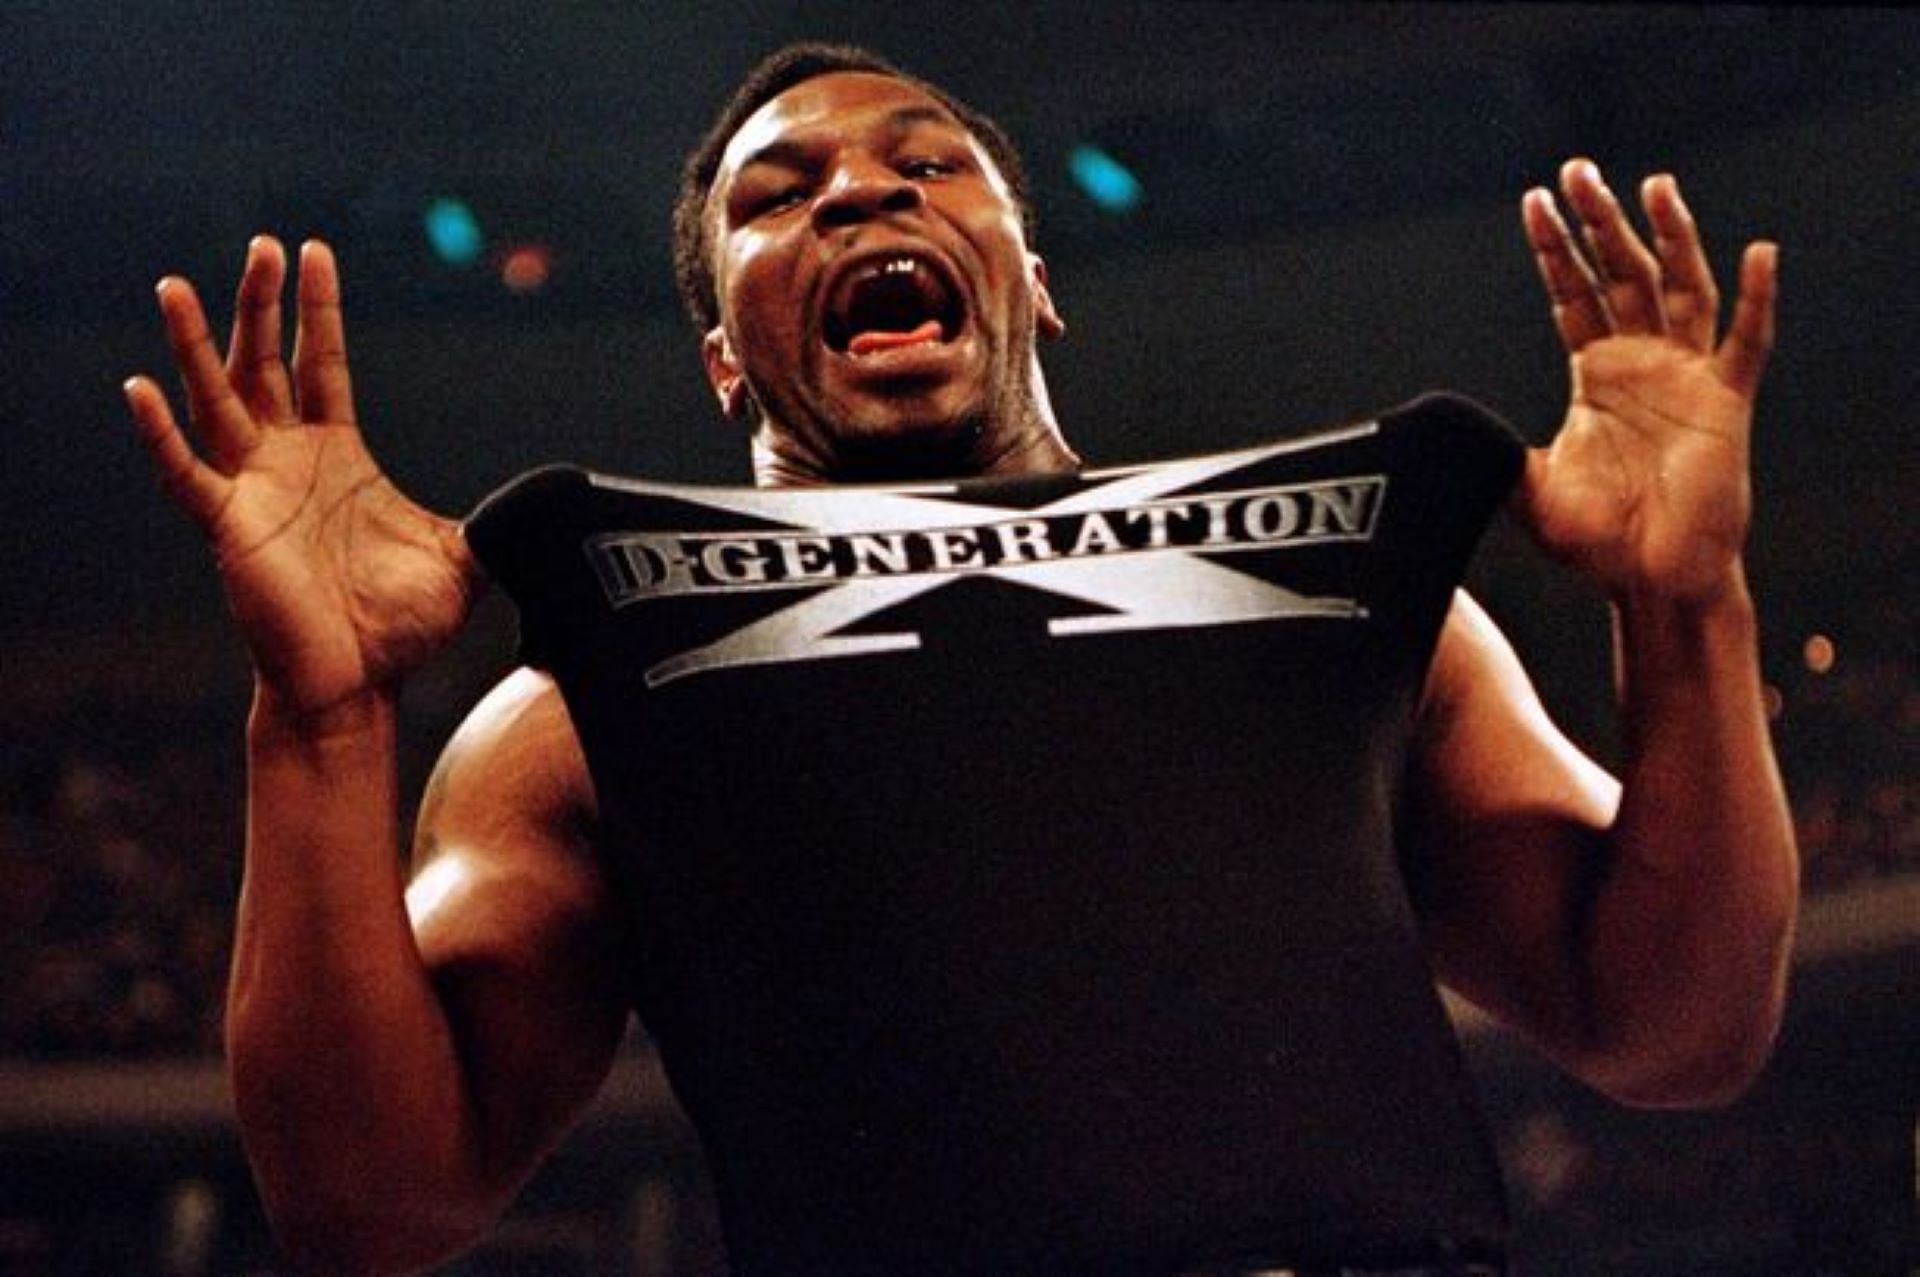 Mike Tyson briefly joined D-Generation X